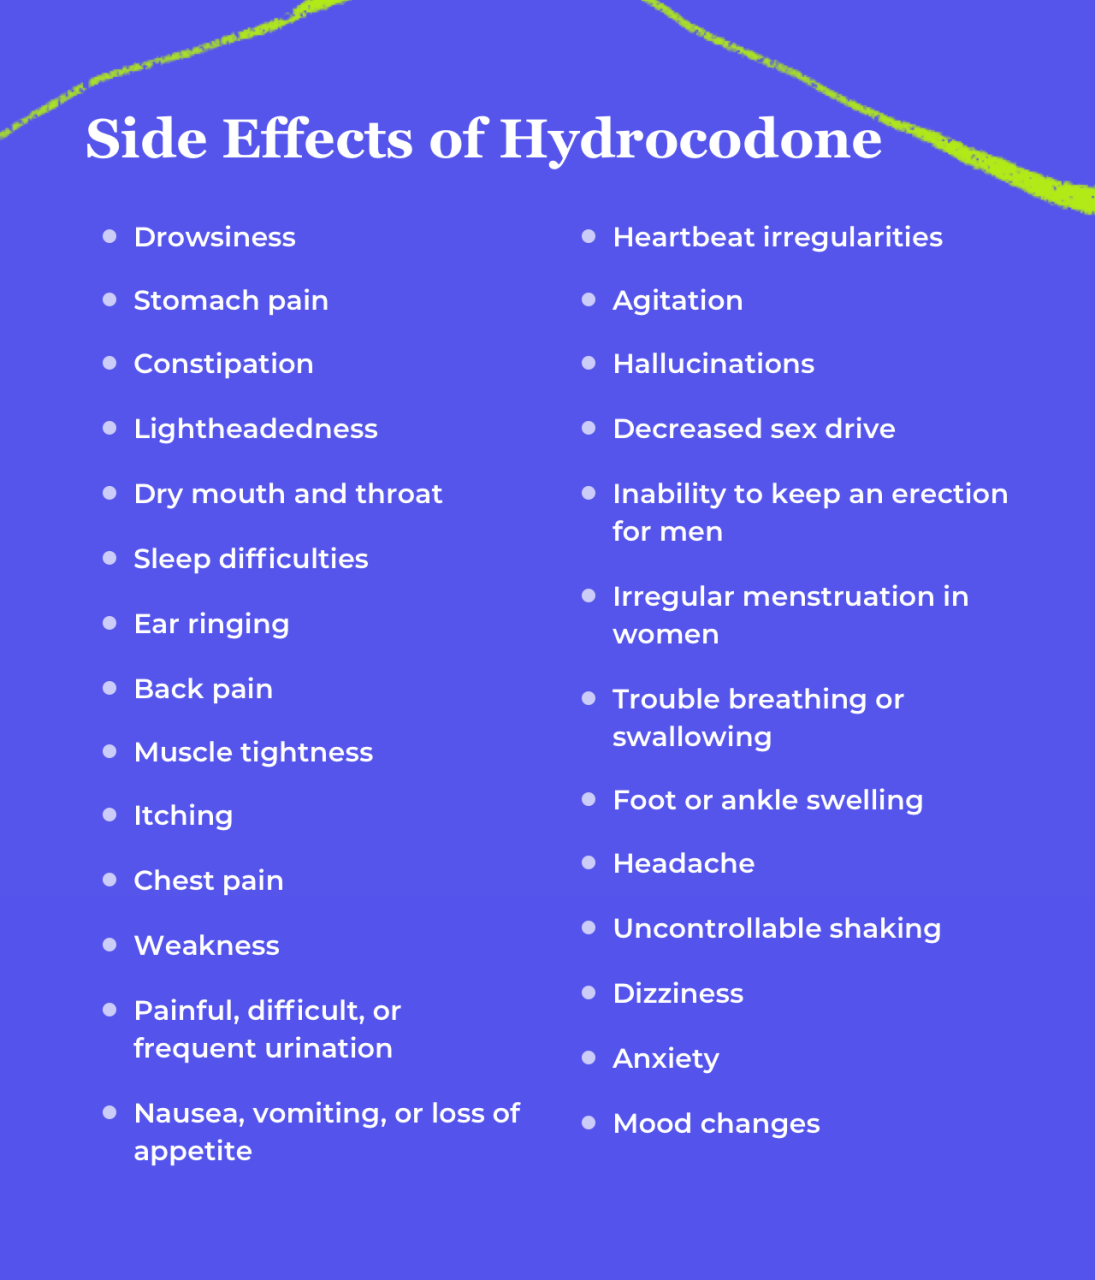 Hydrocodone: Uses, Side Effects, Misuse & More | Bicycle Health